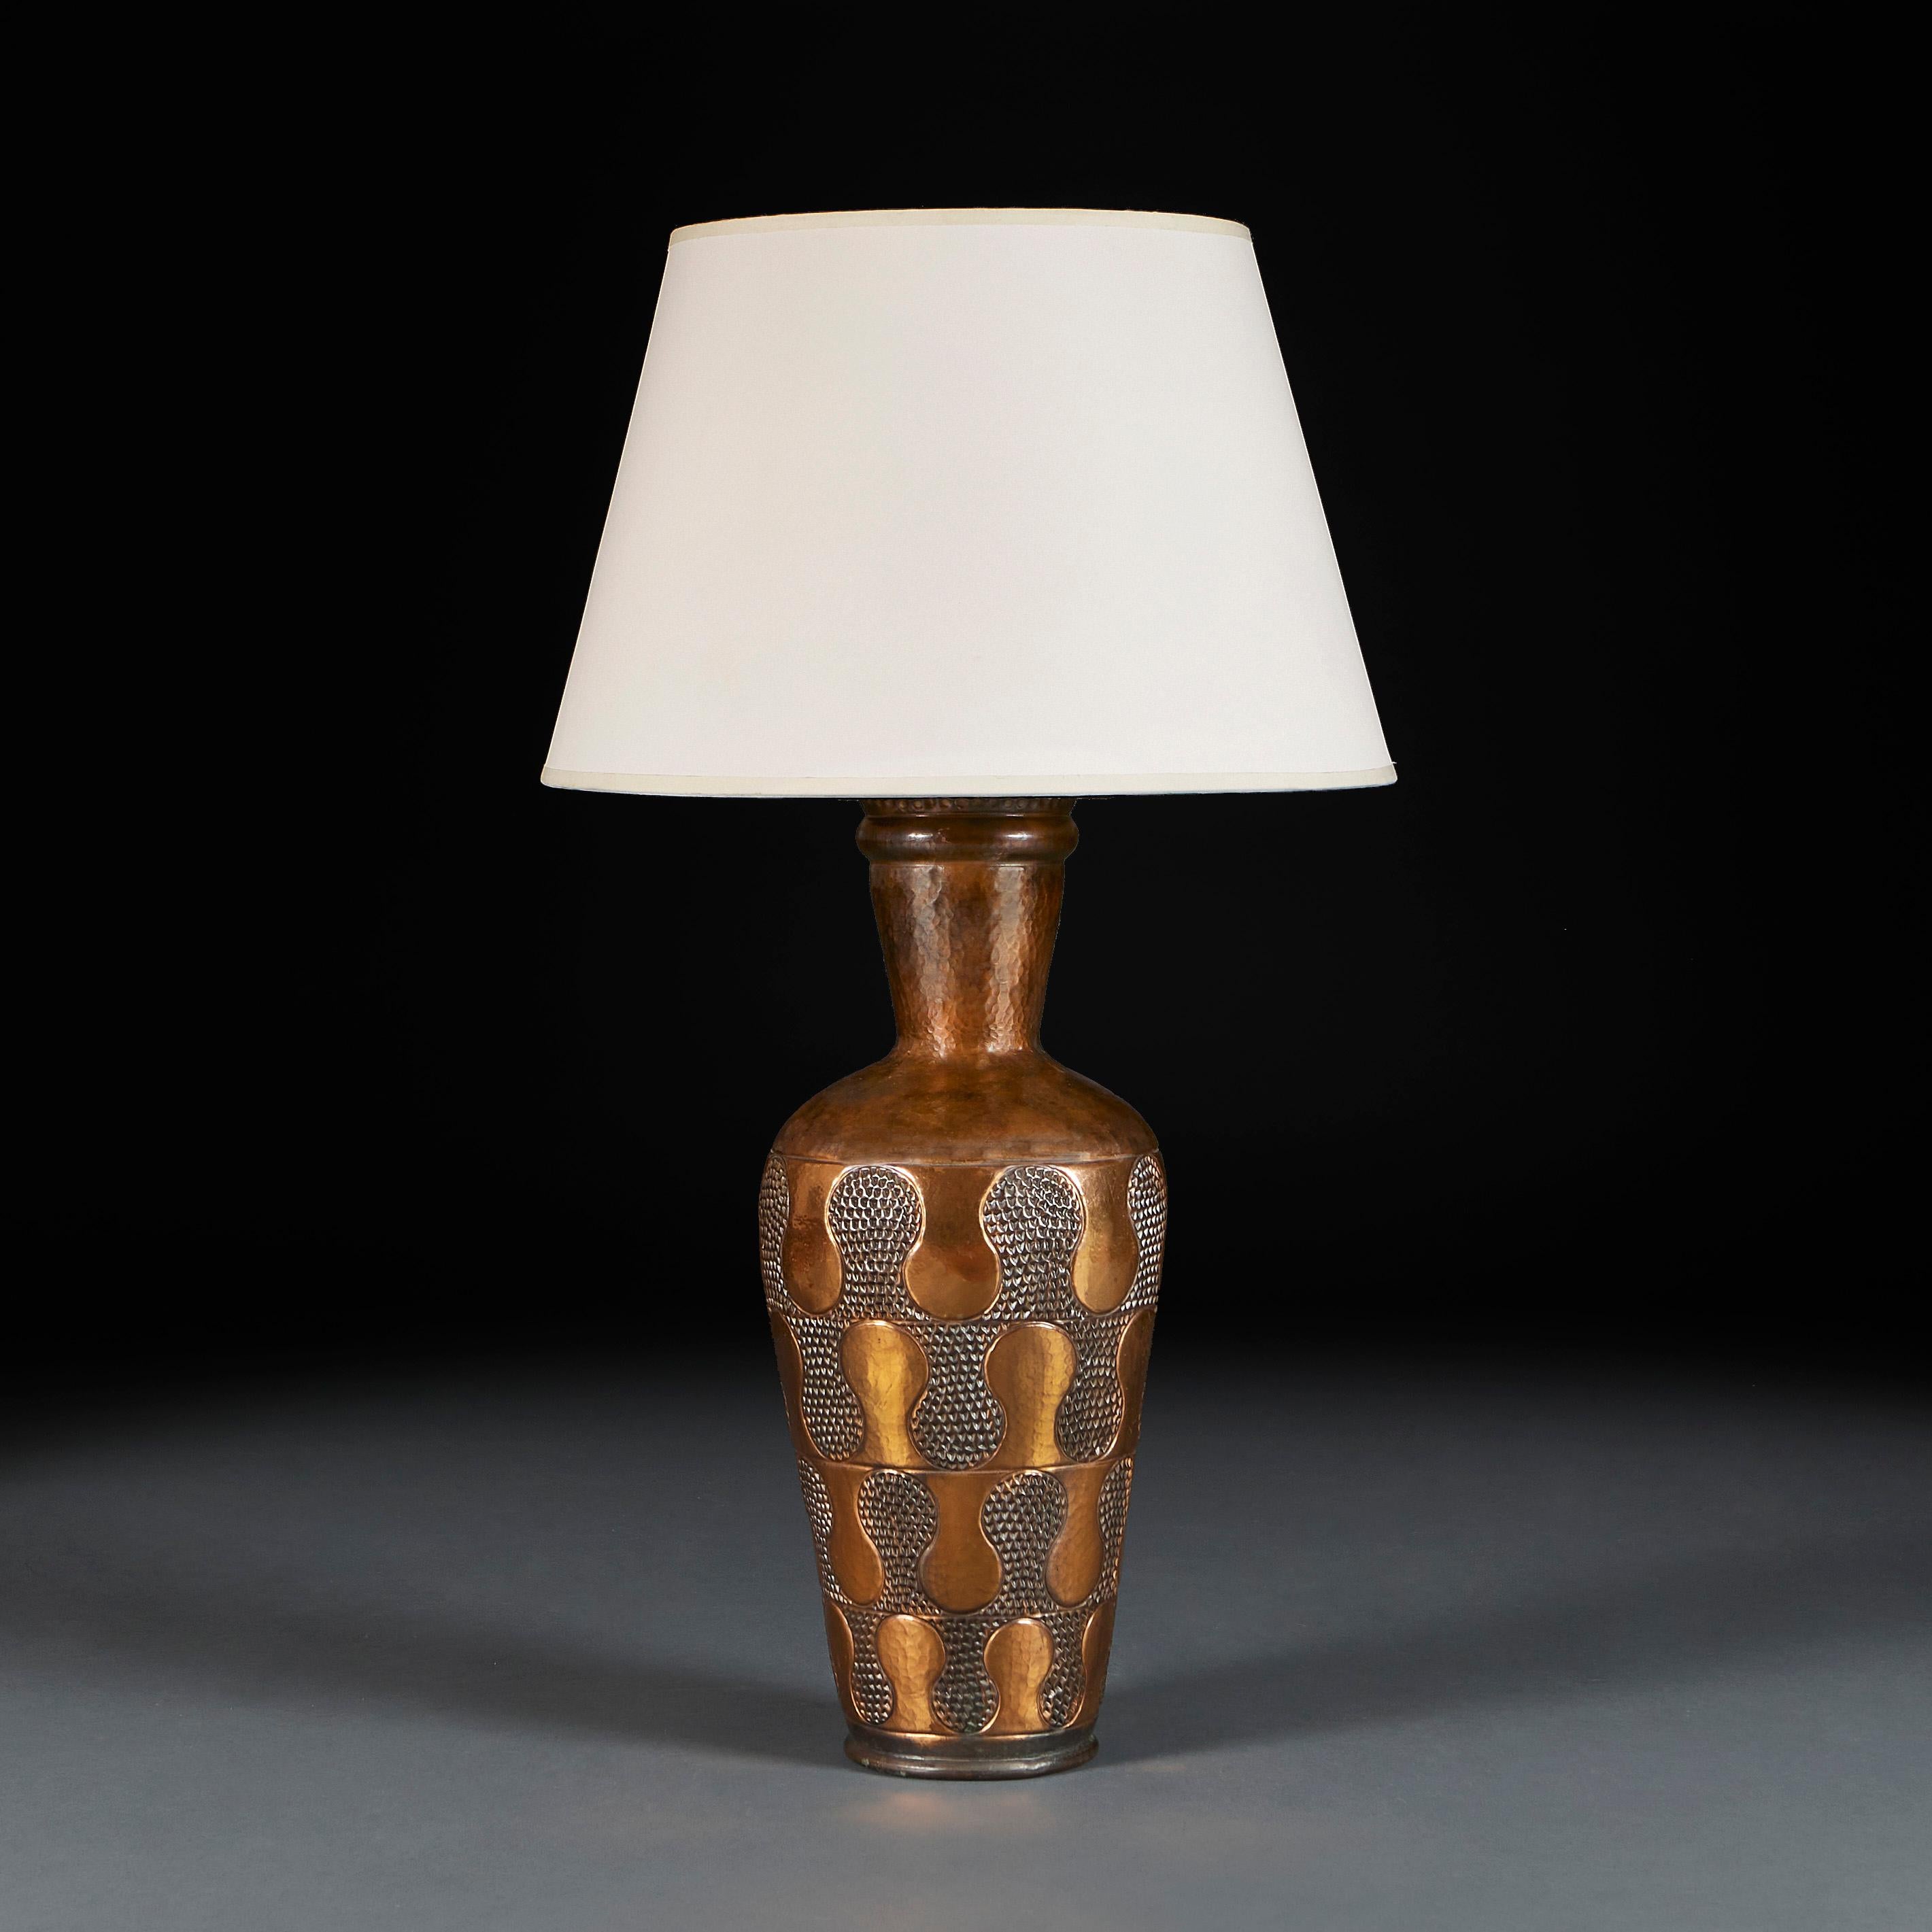 England, circa 1920

An early twentieth century arts and crafts hammered copper vase of tapering form with punched wave design and frilled rim, now converted as a lamp.

Height of vase 52.00cm
Height with shade 81.00cm
Diameter of base